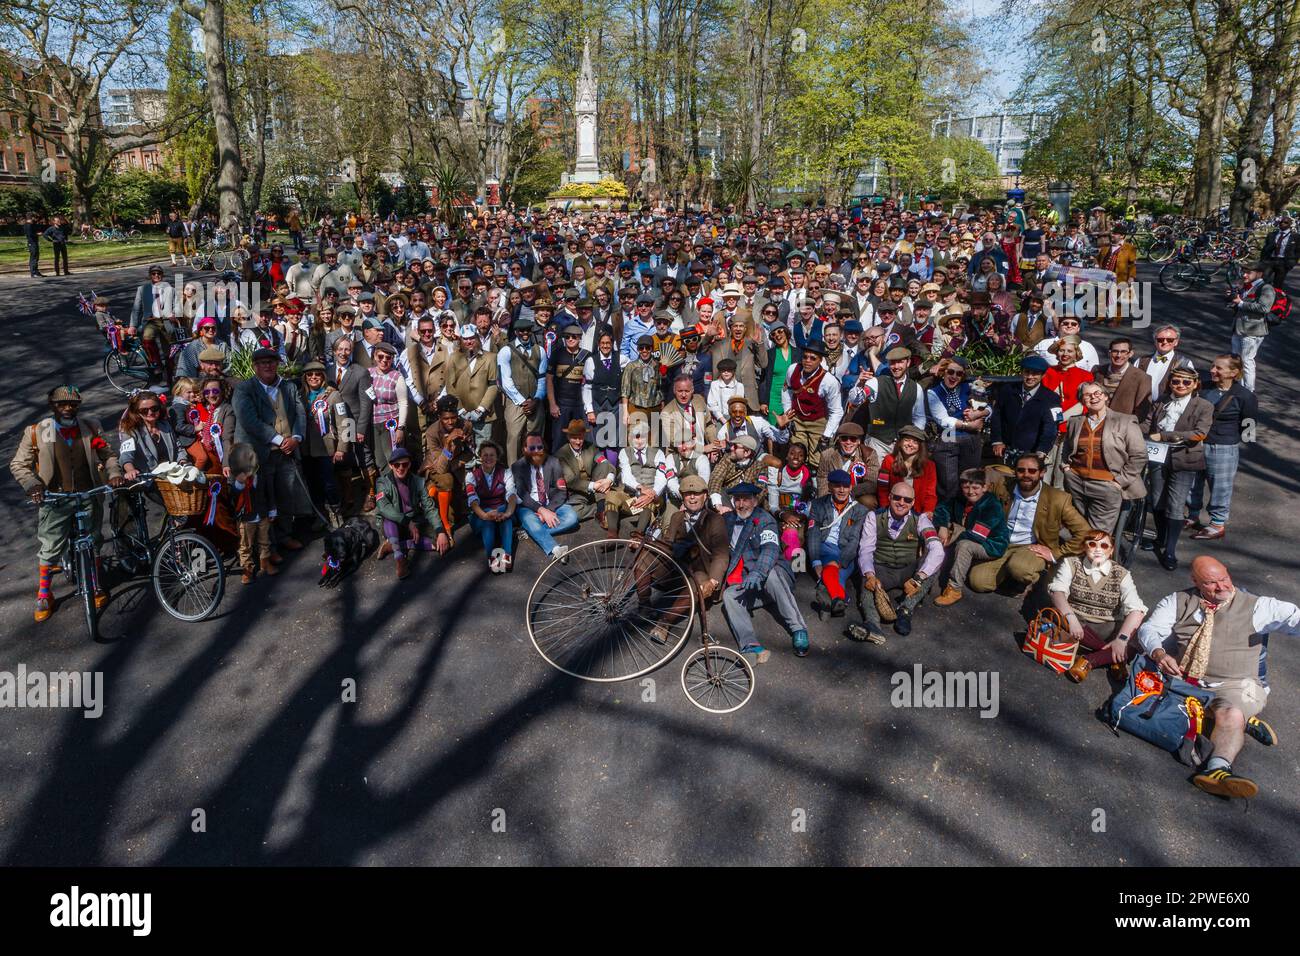 A group photograph for the participants of the Tweed Run 2023 event in London. Stock Photo